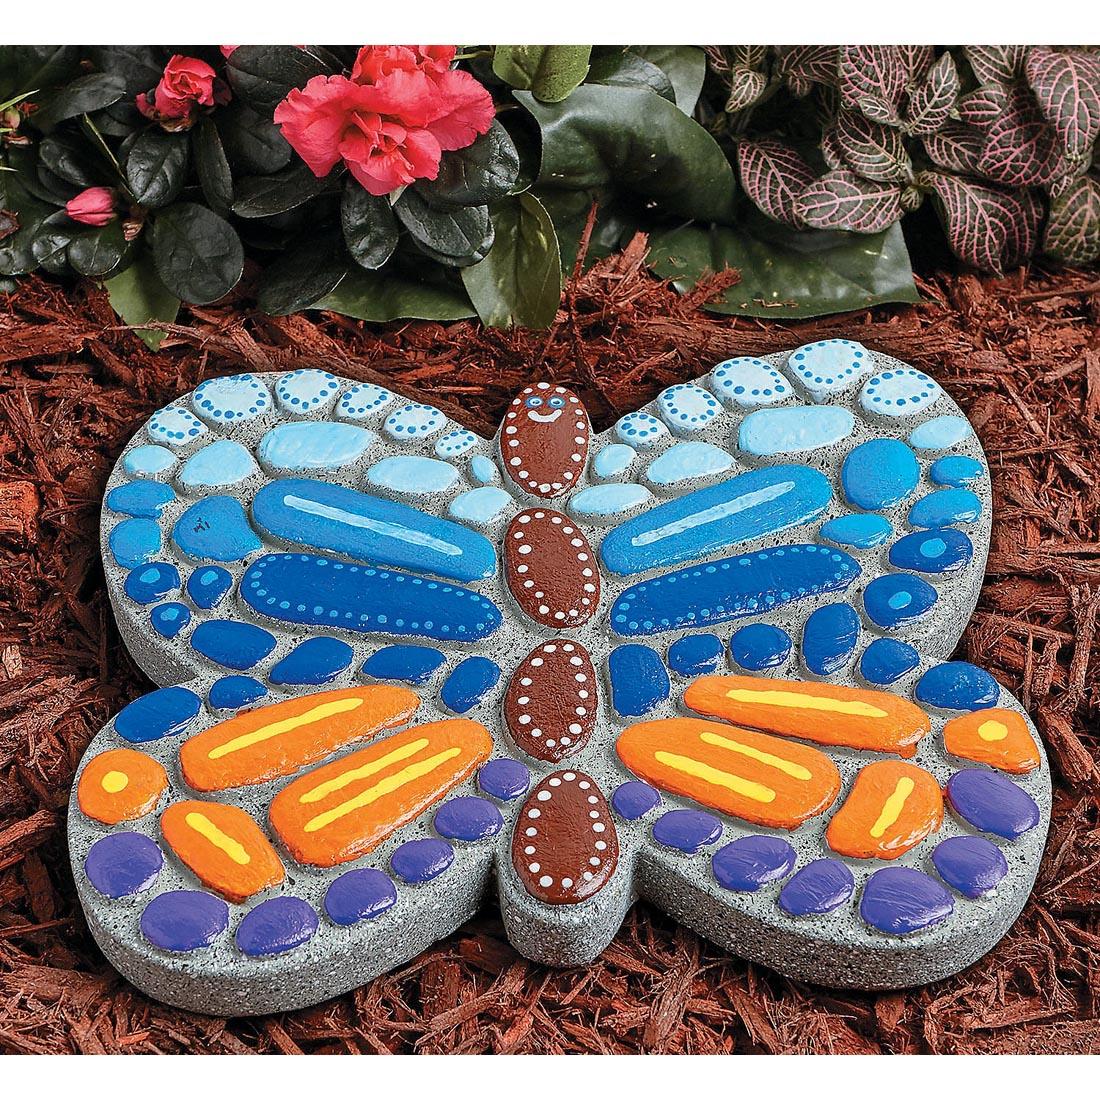 Finished project from the Paint Your Own Stepping Stone Butterfly Kit